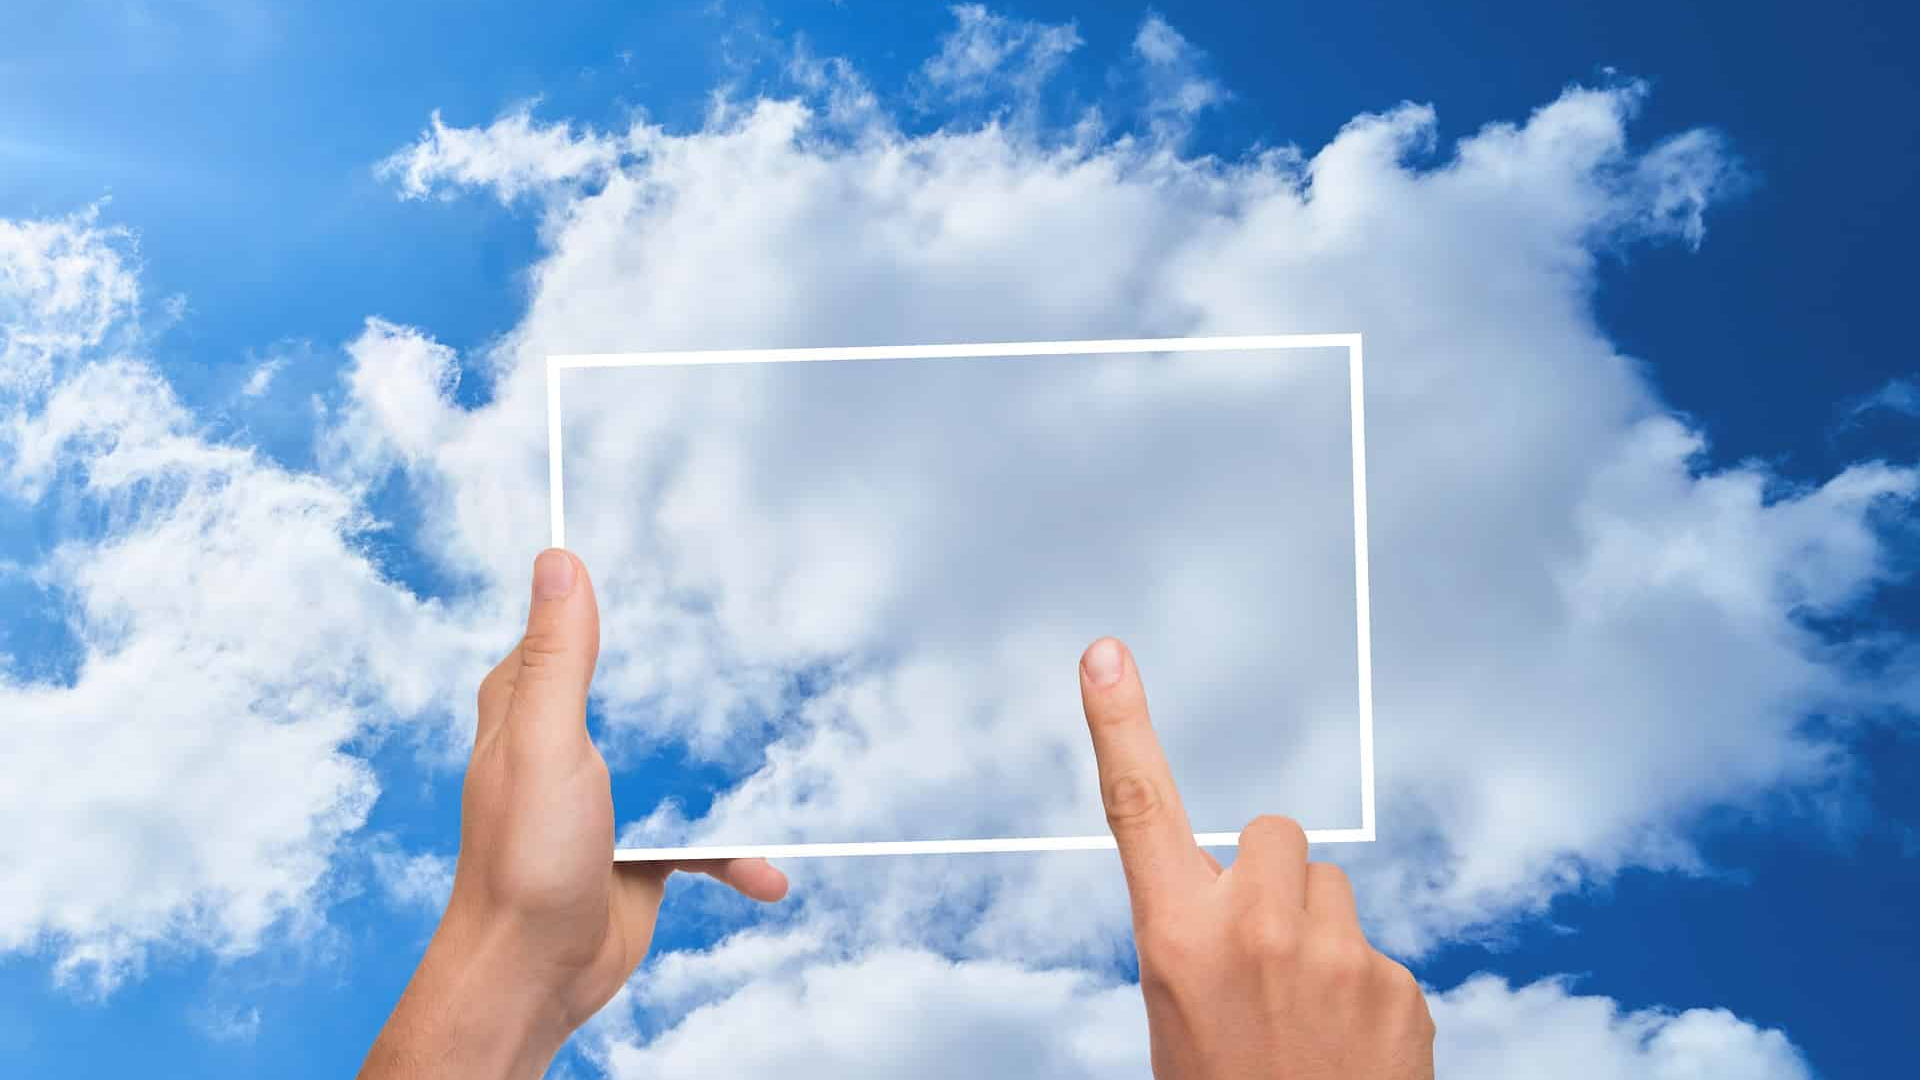 Using software in the Cloud